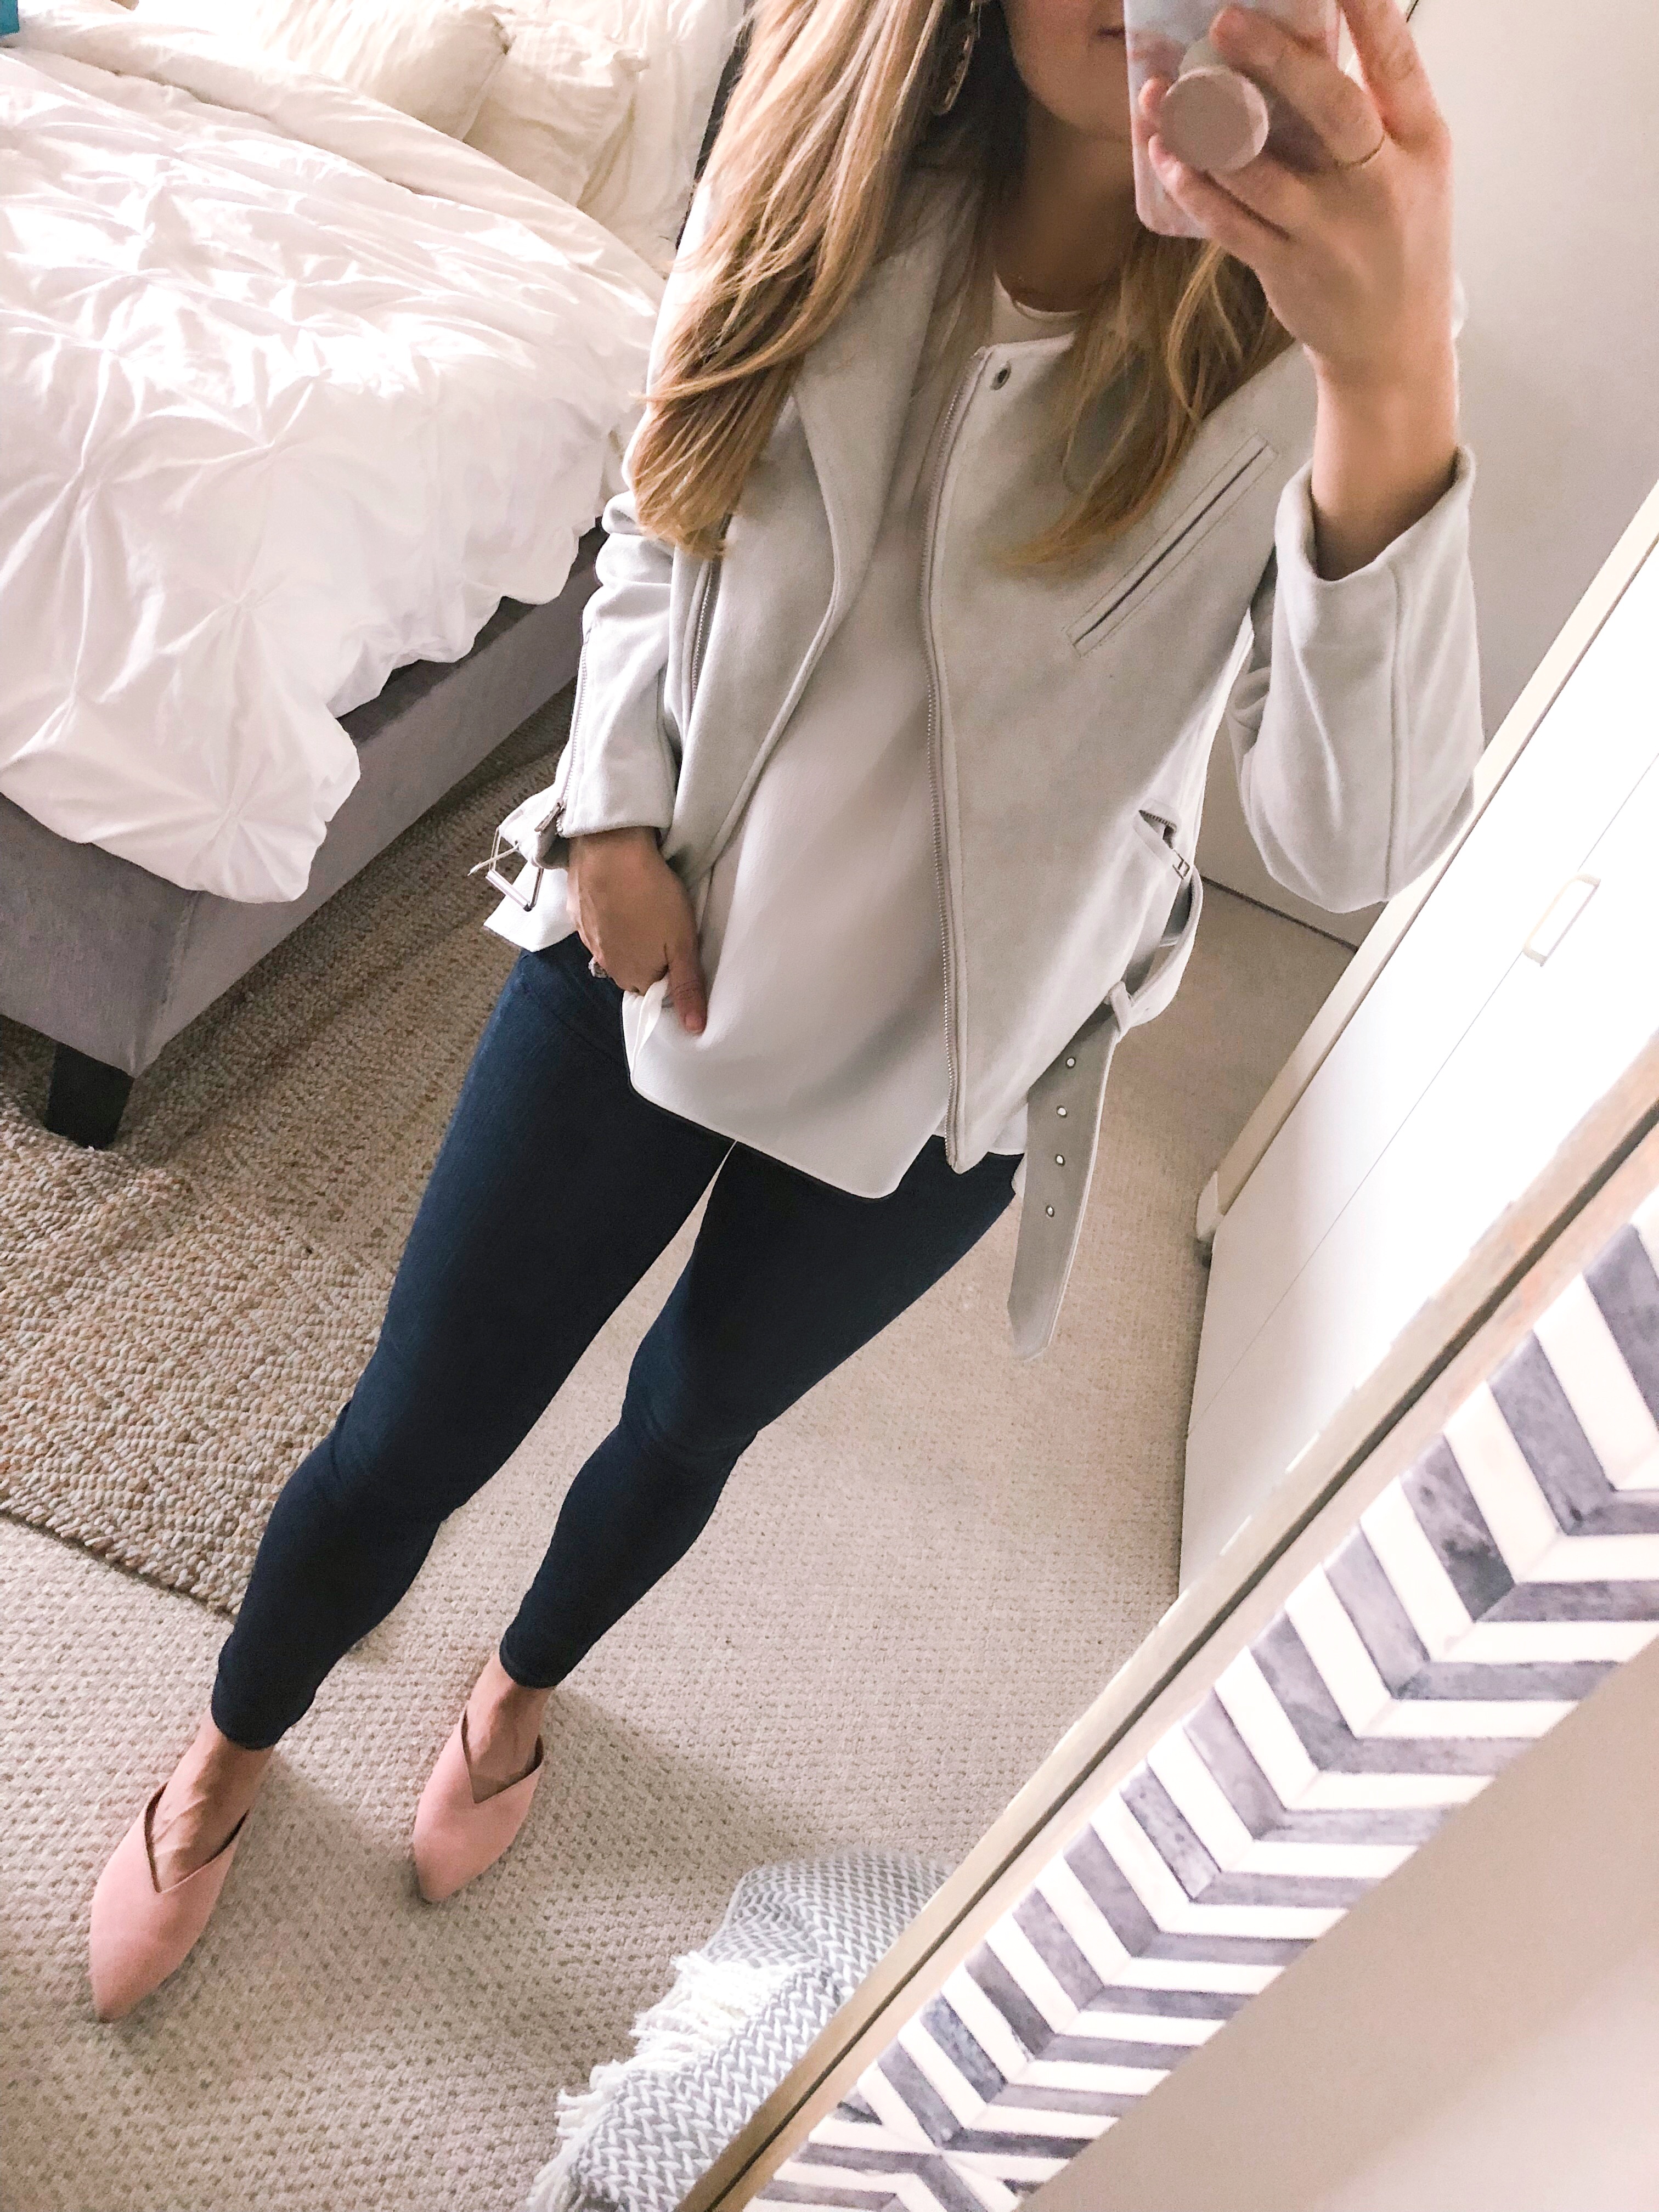 pink suede flats and grey moto jacket